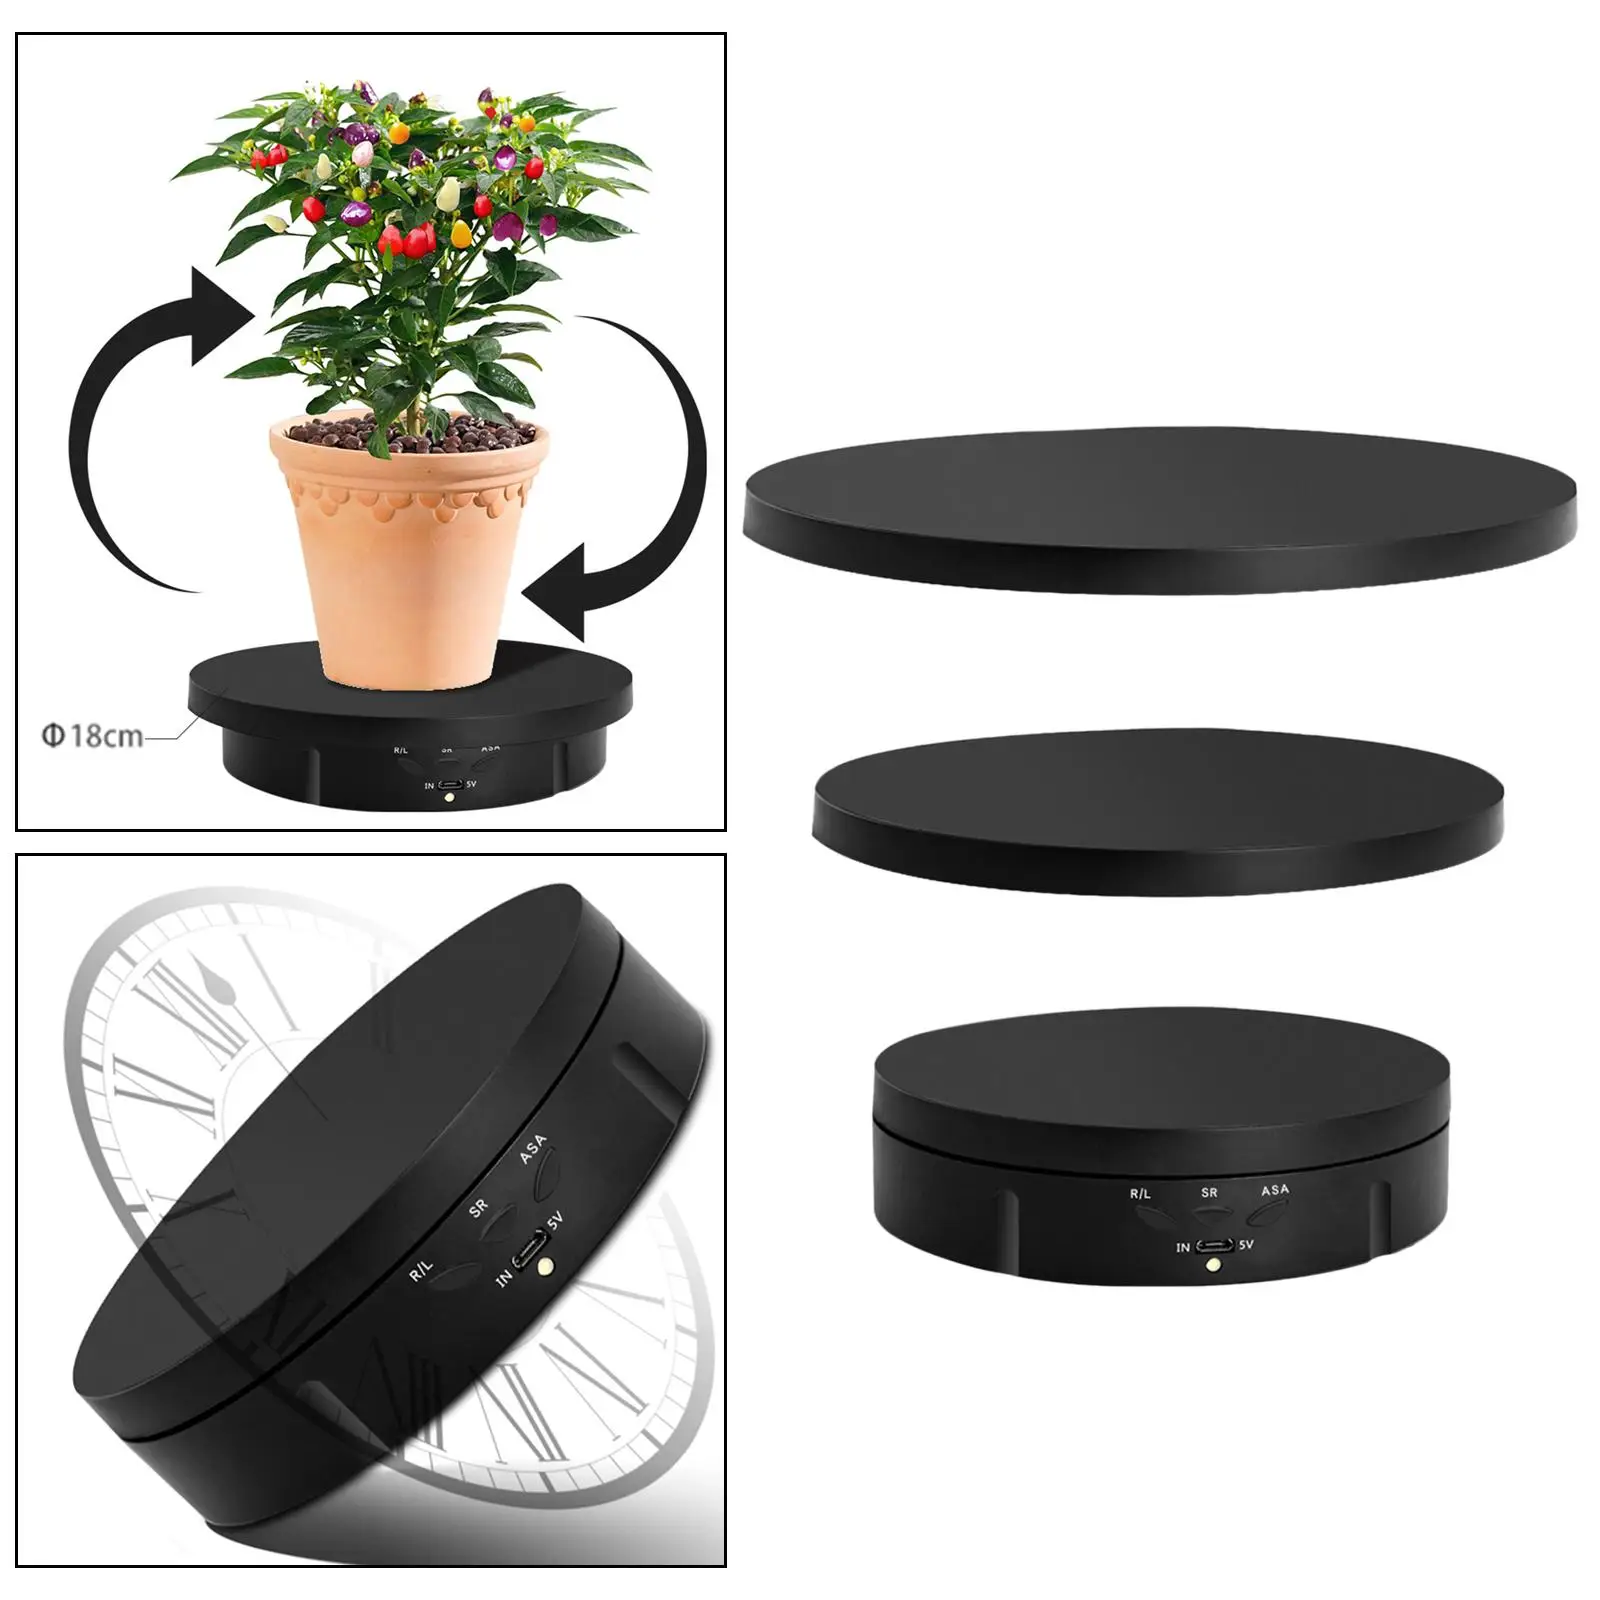 Motorized Rotating Display Stand Multifunctional 3 Sizes Replacements Turntable Rotating Plate Silient for Models Cake Jewelry